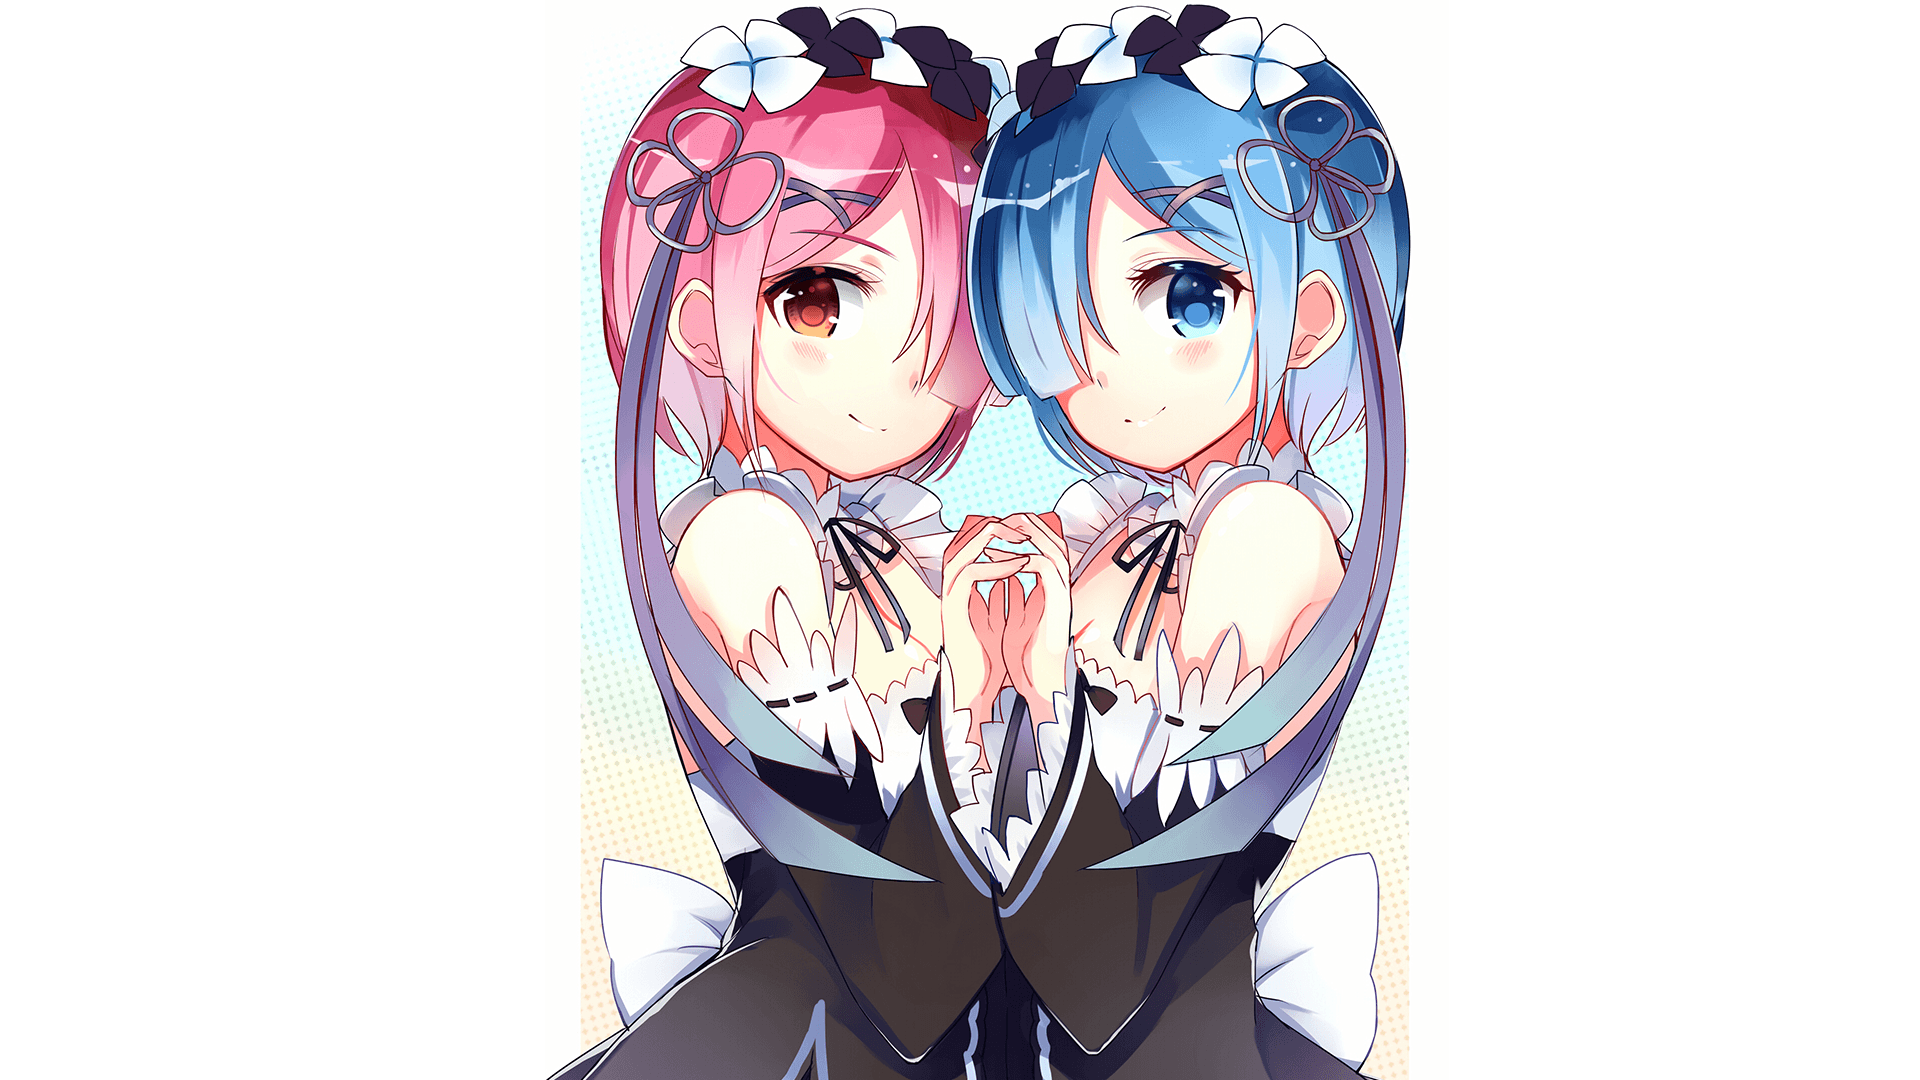 Rem And Ram Wallpaper (Picture)